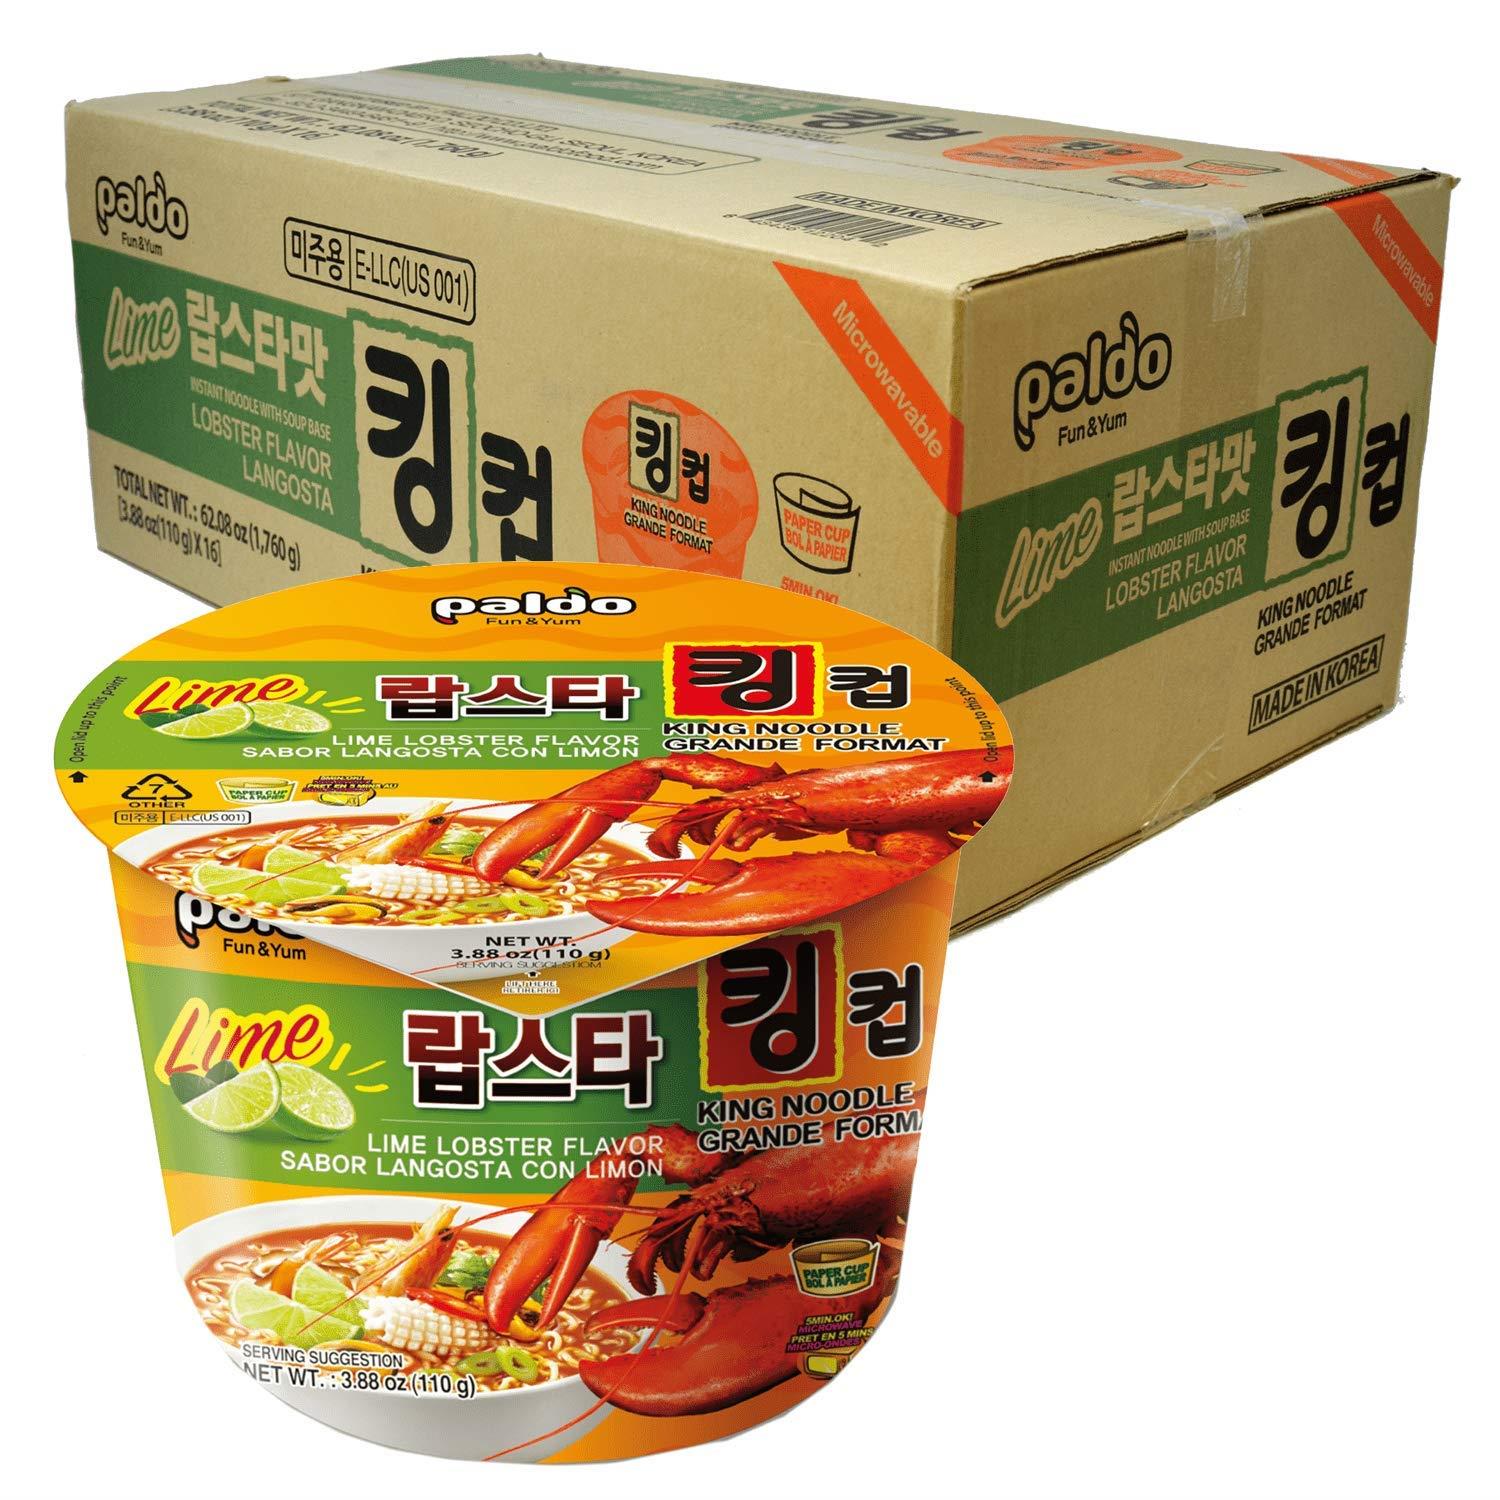 Paldo Fun & Yum Lime Lobster Instant Big Cup Noodles with Soup, Lime Lobster Seafood Flavor Based Broth, Best Oriental Style, Original Korean King Cup Ramyun, 팔도 라임 랍스타맛 킹 컵 110g (3.88 oz) x 8 Pack